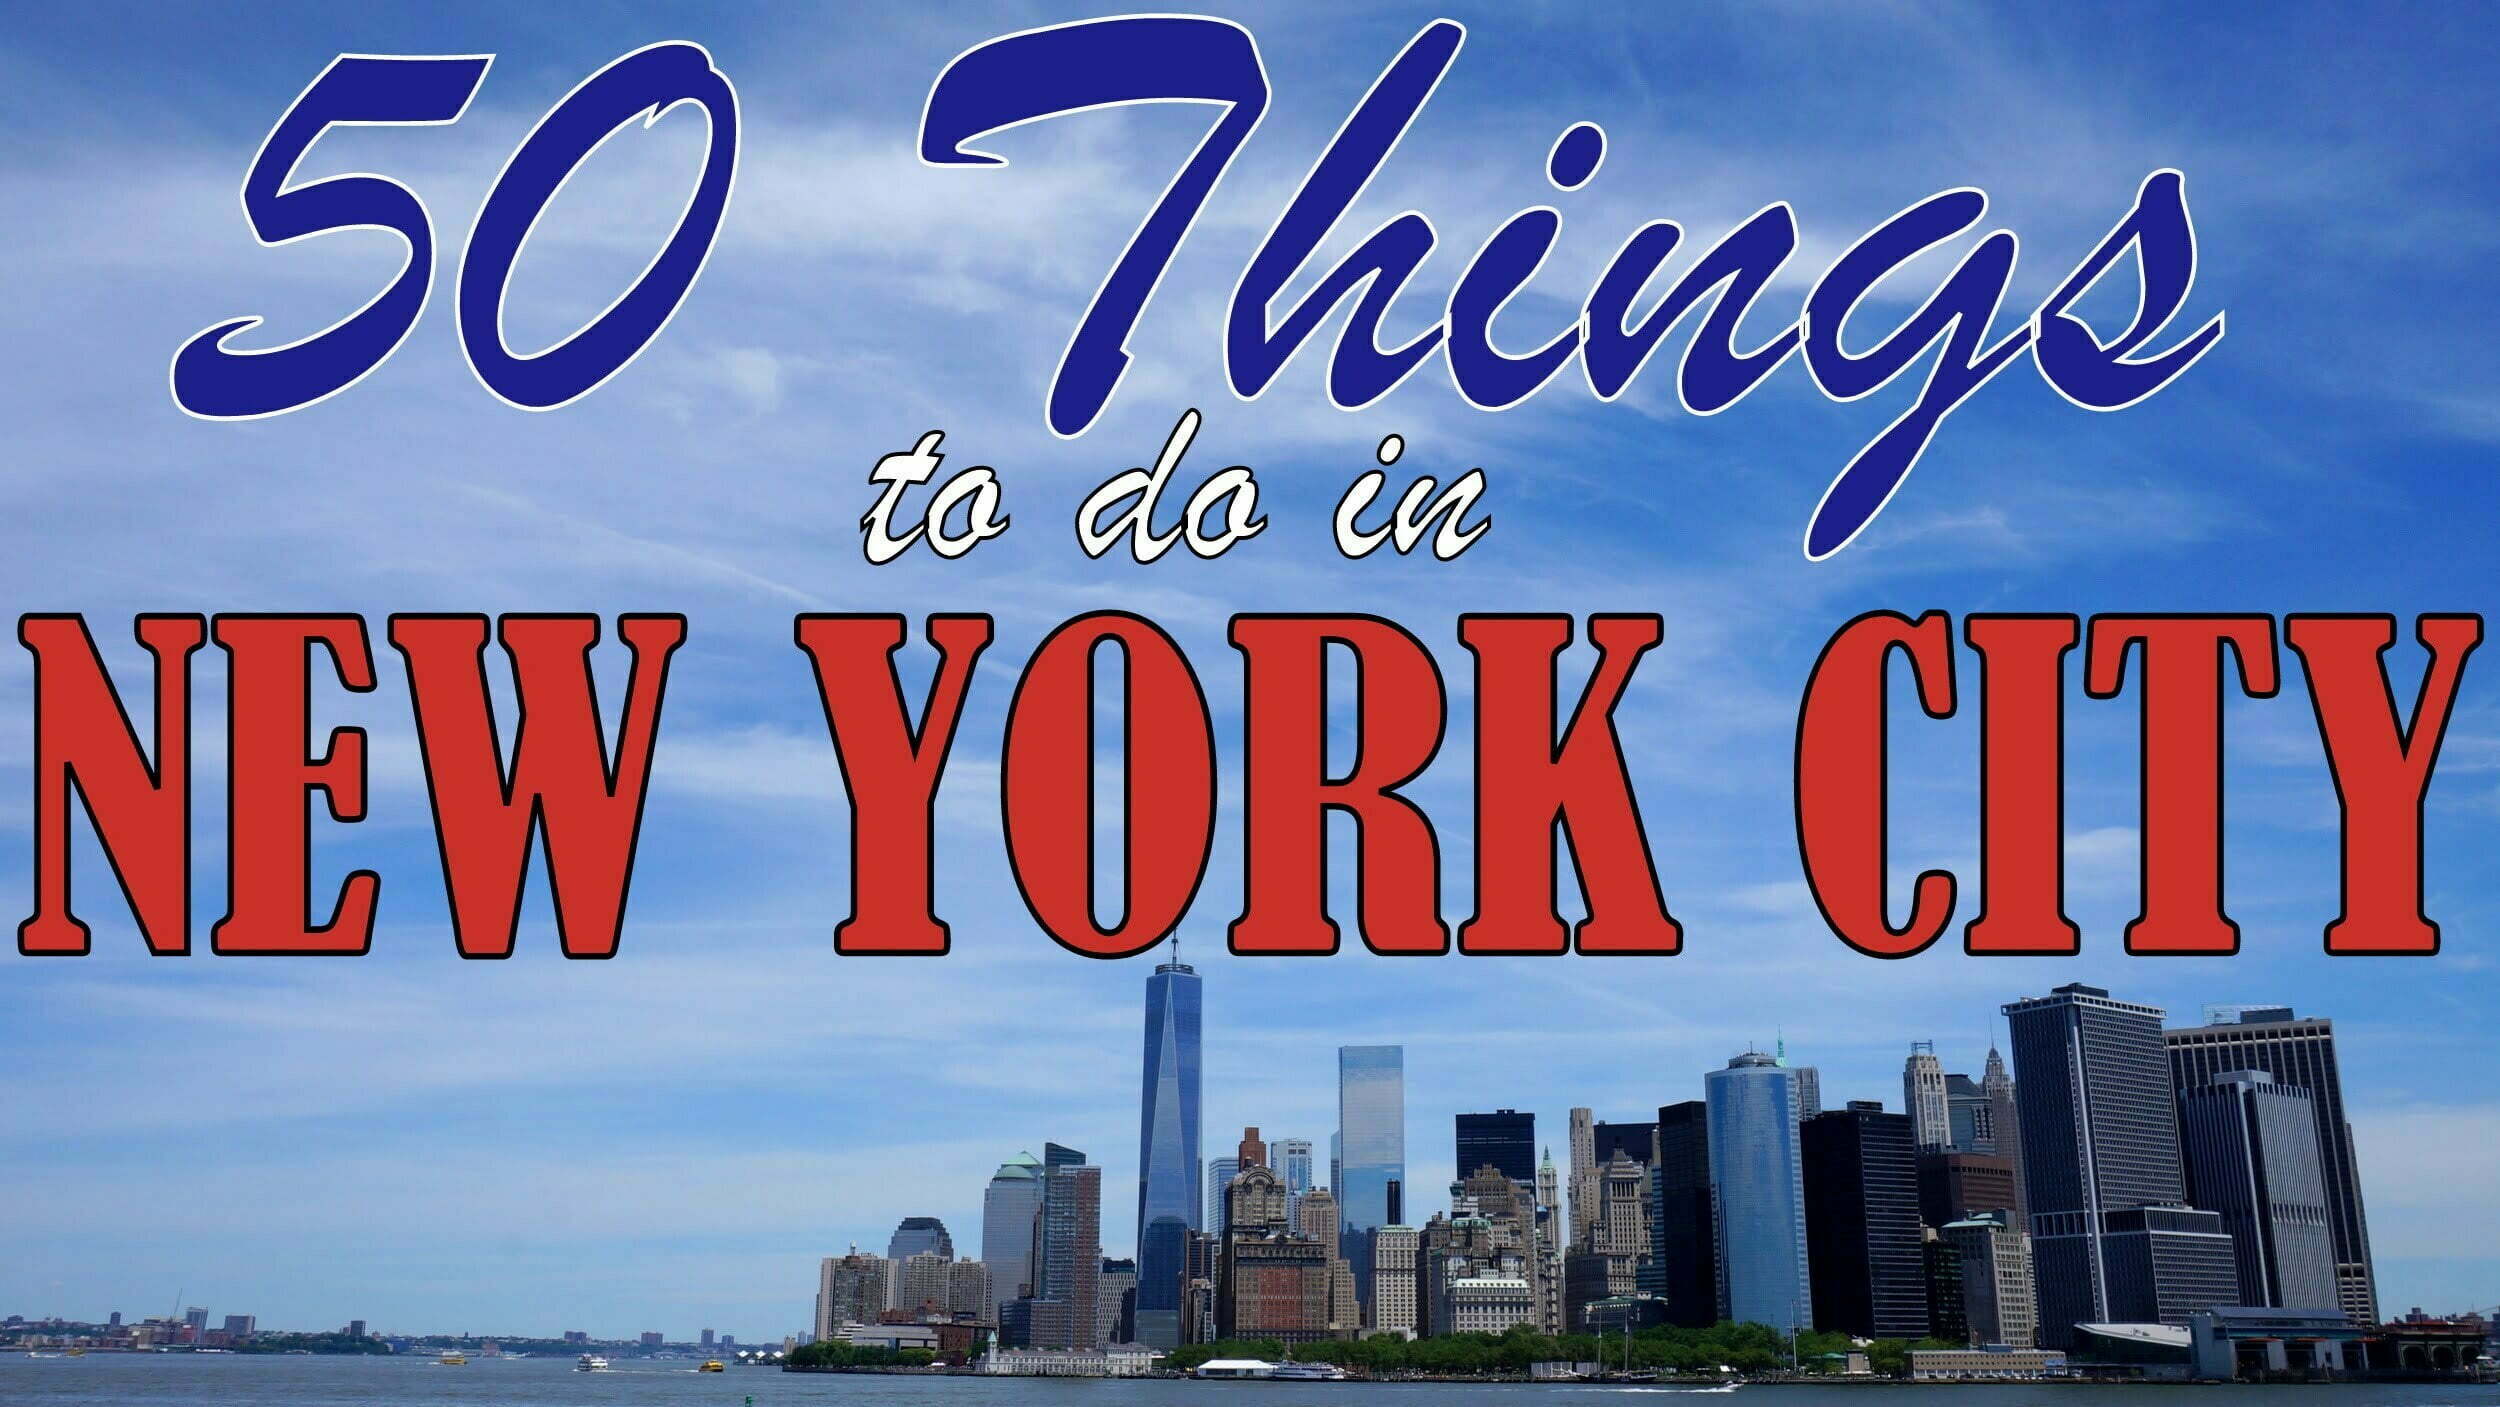 New York City Travel Video Guide